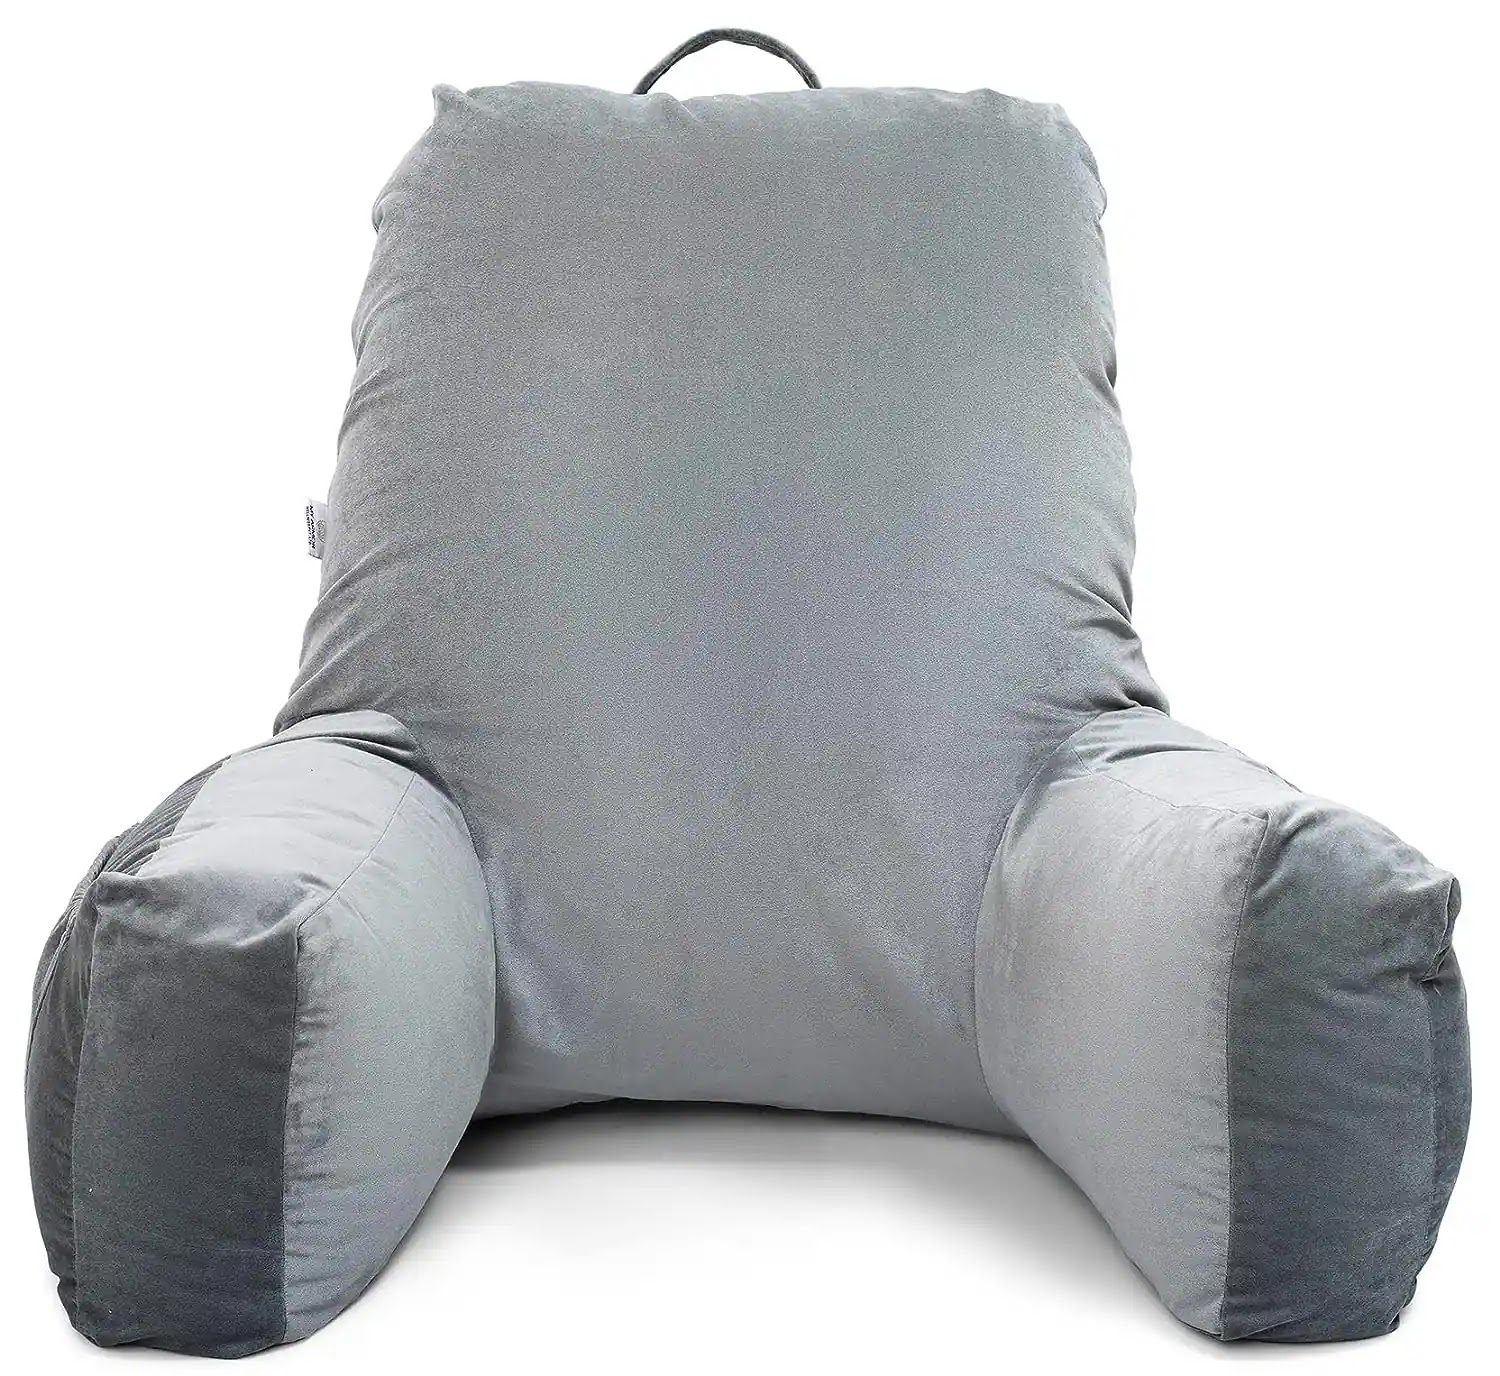 Bed Rest Pillow with Support Arms